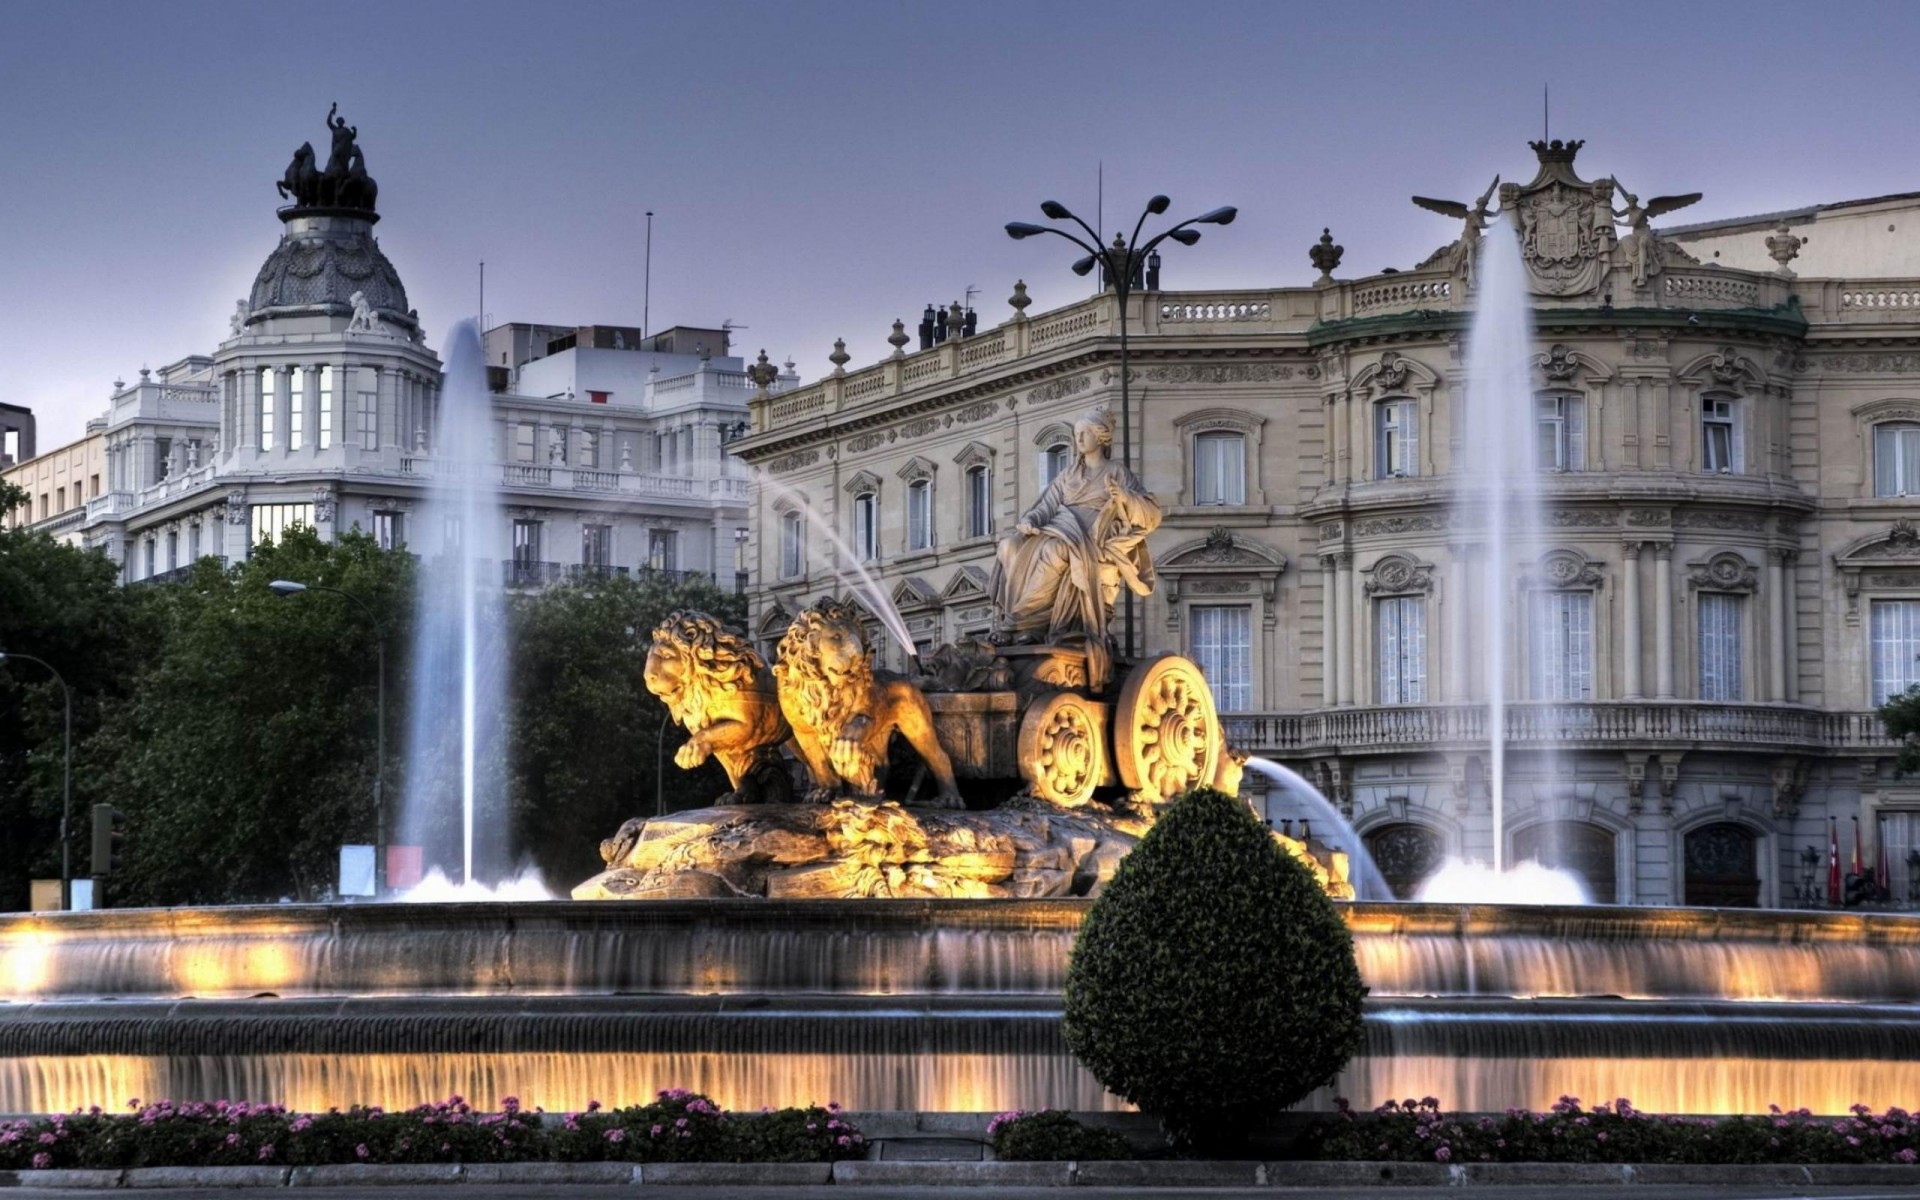 madrid, Spain, The, Fountain, The, Fountain, Of, Cibeles, Dusk, Evening, A, Monument, Of, The, Earth, Goddess, Of, Fertility, Cybele, The, Chariot, Lions, Palace, Palace, Of, Linares Wallpaper